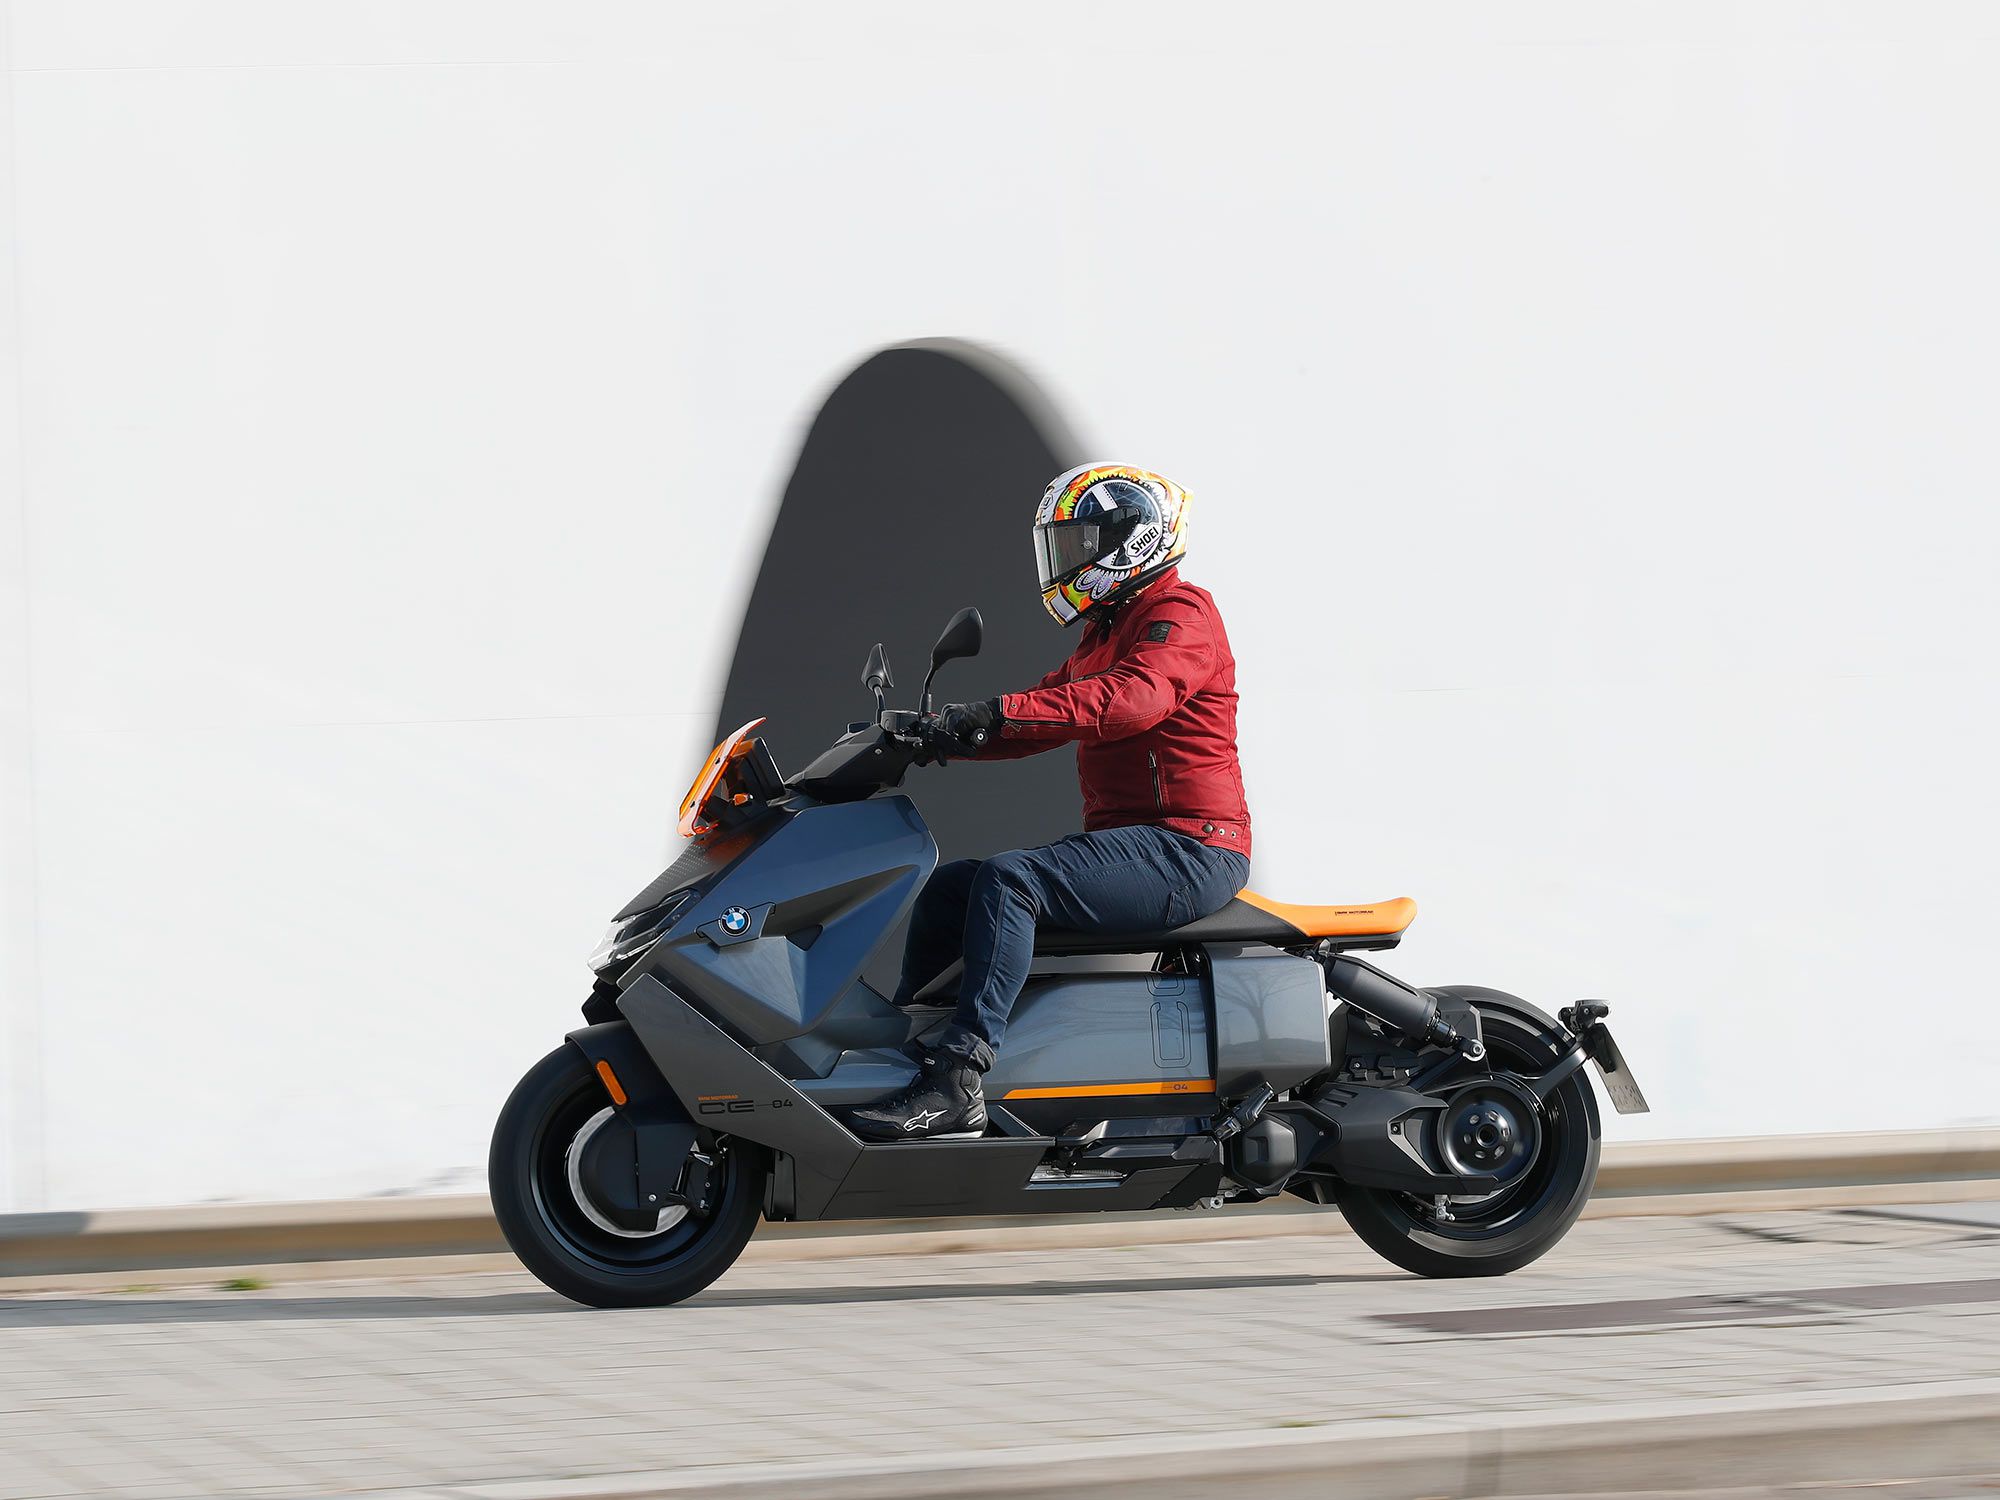 The standard CE 04 comes equipped with underseat storage, enough for a full-face helmet, which is accessible from the side as the seat is fixed in place and very neat, like a large pannier.